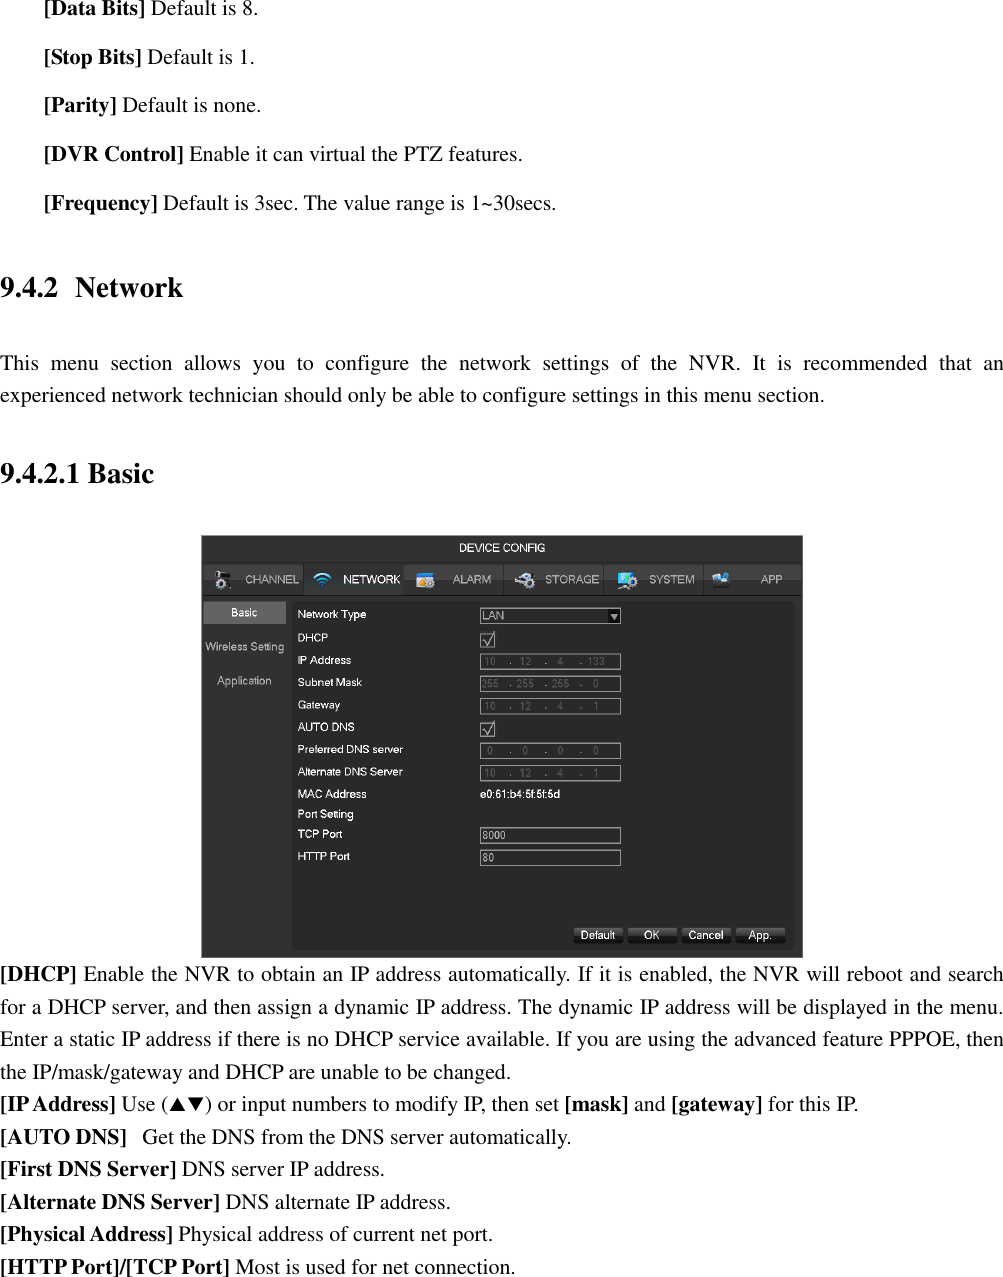  [Data Bits] Default is 8.  [Stop Bits] Default is 1.  [Parity] Default is none.  [DVR Control] Enable it can virtual the PTZ features.  [Frequency] Default is 3sec. The value range is 1~30secs. 9.4.2 Network This  menu  section  allows  you  to  configure  the  network  settings  of  the  NVR.  It  is  recommended  that  an experienced network technician should only be able to configure settings in this menu section. 9.4.2.1 Basic  [DHCP] Enable the NVR to obtain an IP address automatically. If it is enabled, the NVR will reboot and search for a DHCP server, and then assign a dynamic IP address. The dynamic IP address will be displayed in the menu. Enter a static IP address if there is no DHCP service available. If you are using the advanced feature PPPOE, then the IP/mask/gateway and DHCP are unable to be changed. [IP Address] Use () or input numbers to modify IP, then set [mask] and [gateway] for this IP. [AUTO DNS]   Get the DNS from the DNS server automatically. [First DNS Server] DNS server IP address. [Alternate DNS Server] DNS alternate IP address. [Physical Address] Physical address of current net port. [HTTP Port]/[TCP Port] Most is used for net connection. 